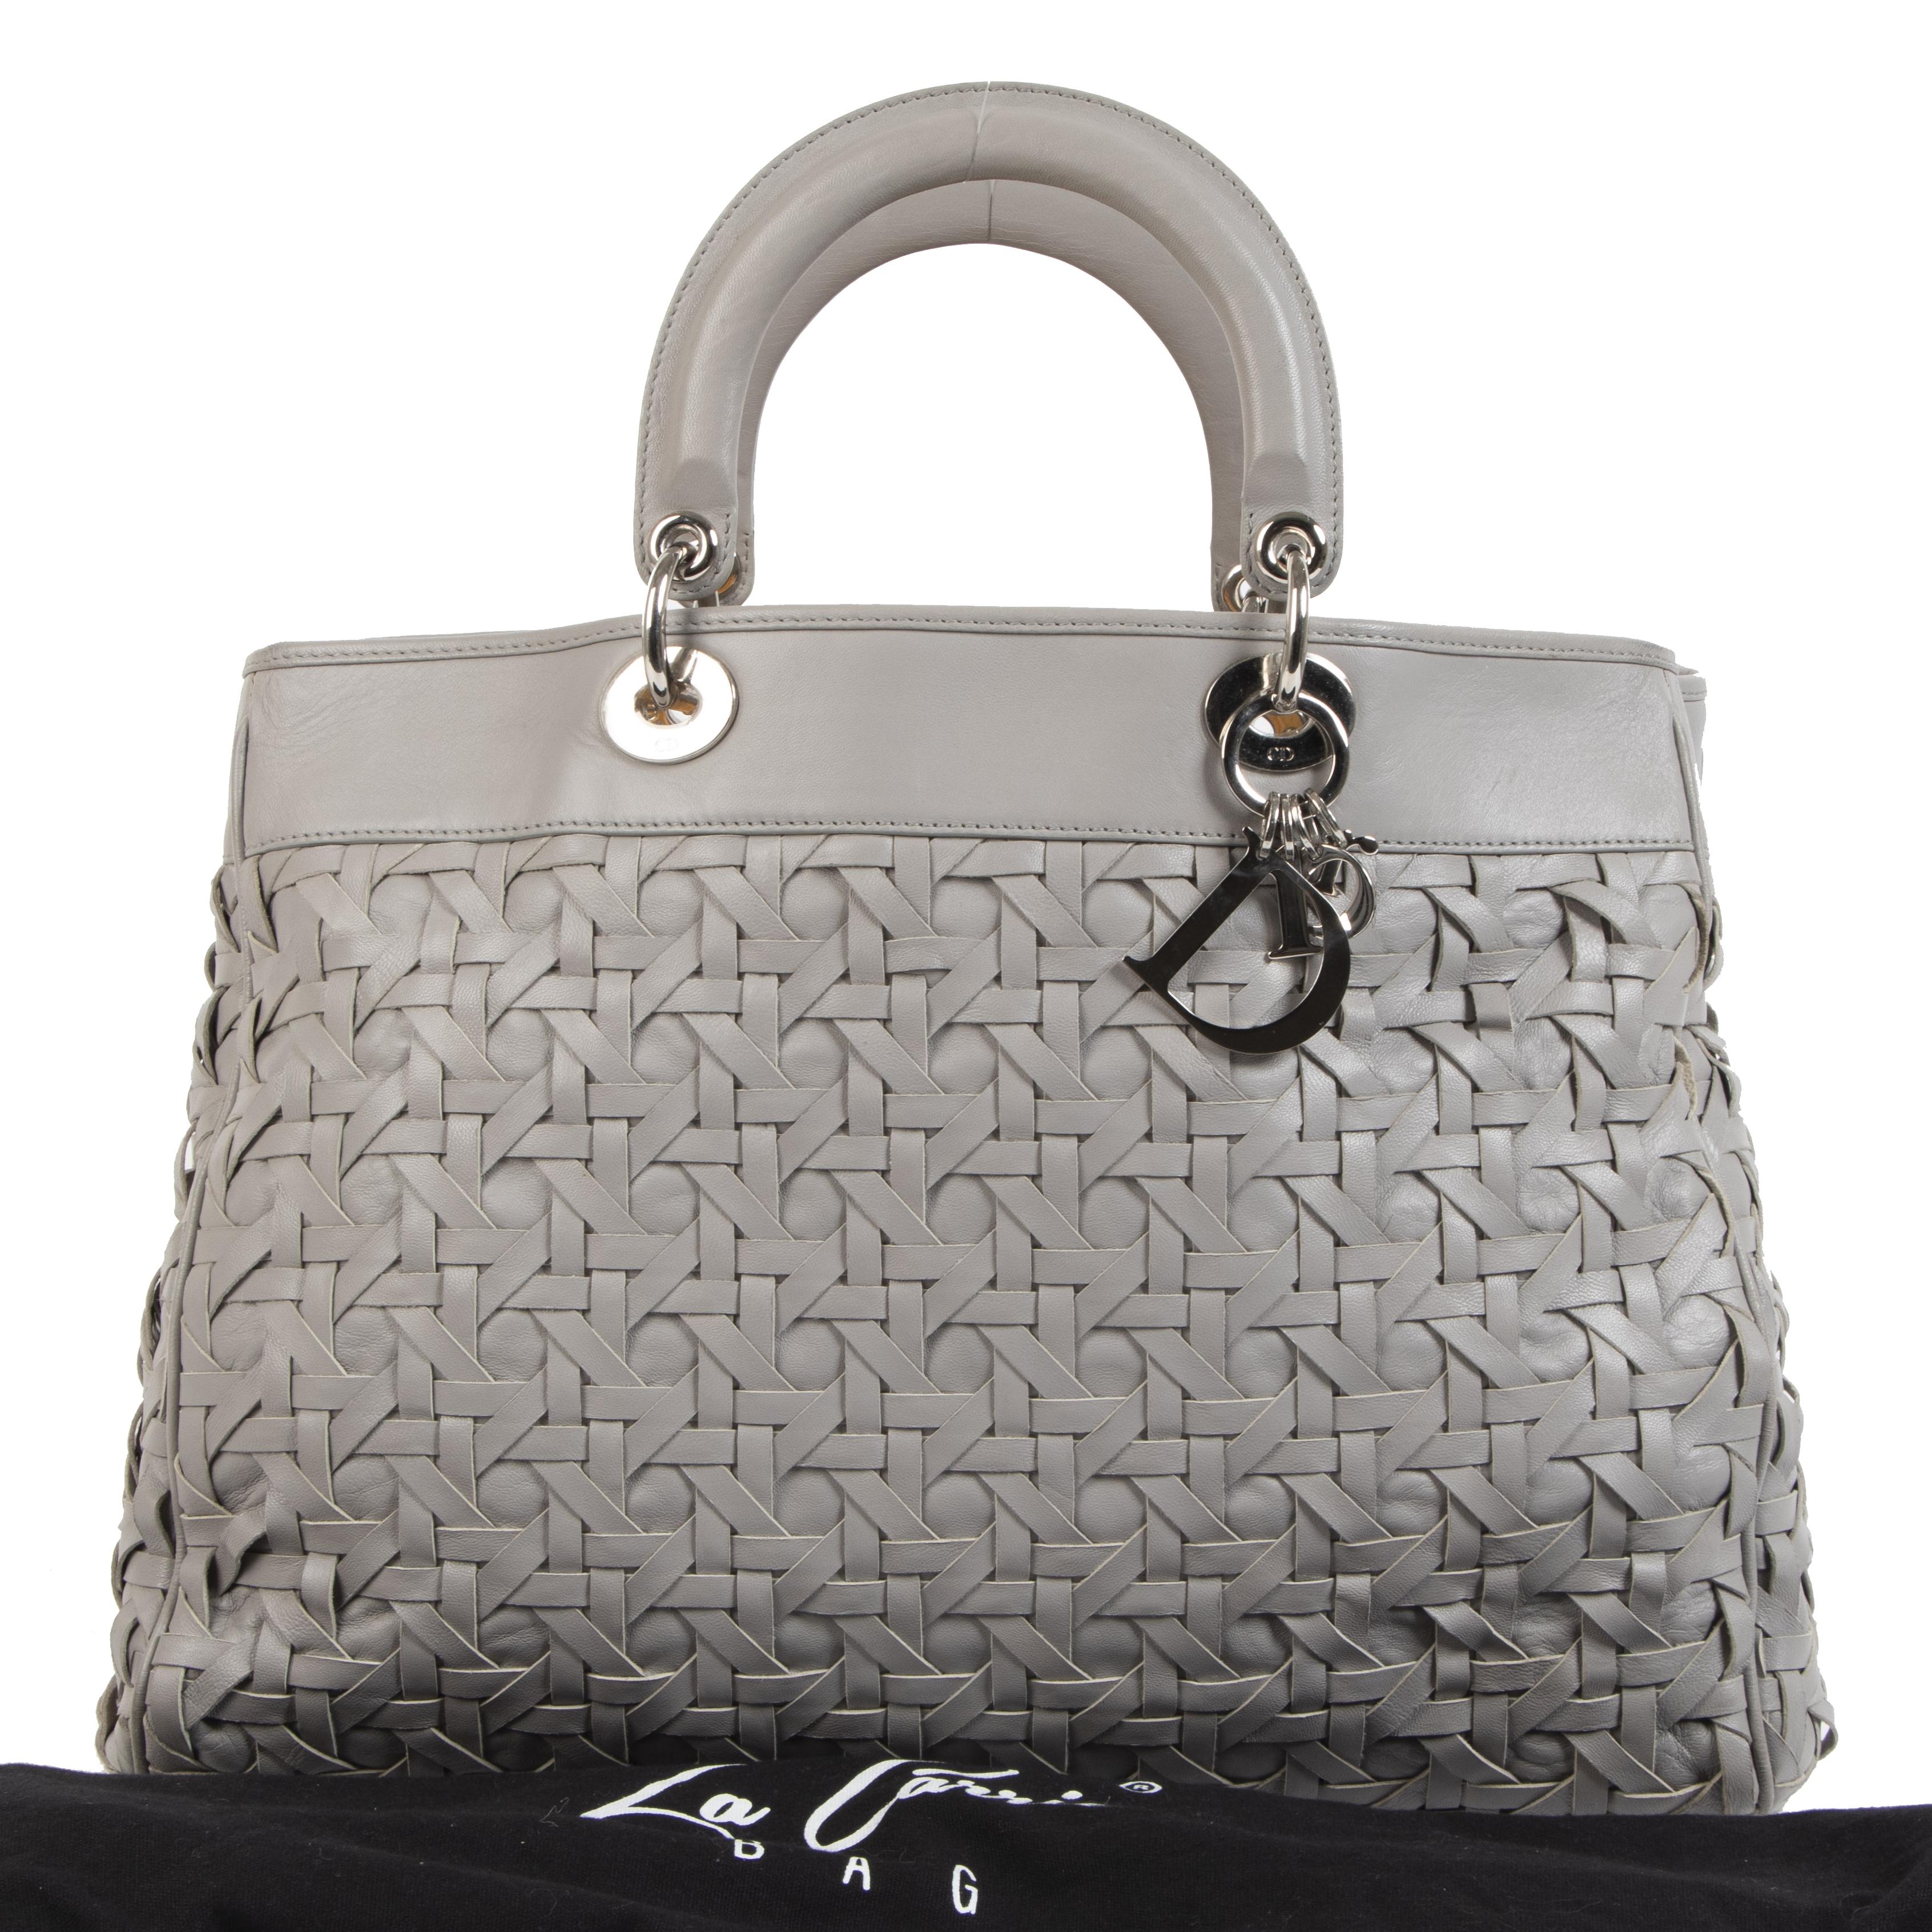 Very good condition

Dior Lady Dior Avenue Grey Tote Bag

Fans of the Lady Dior bag are going to love this piece because it's an upgraded version of the iconic bag. The Lady Dior Avenue tote bag has, much like the signature Lady Dior bag, the